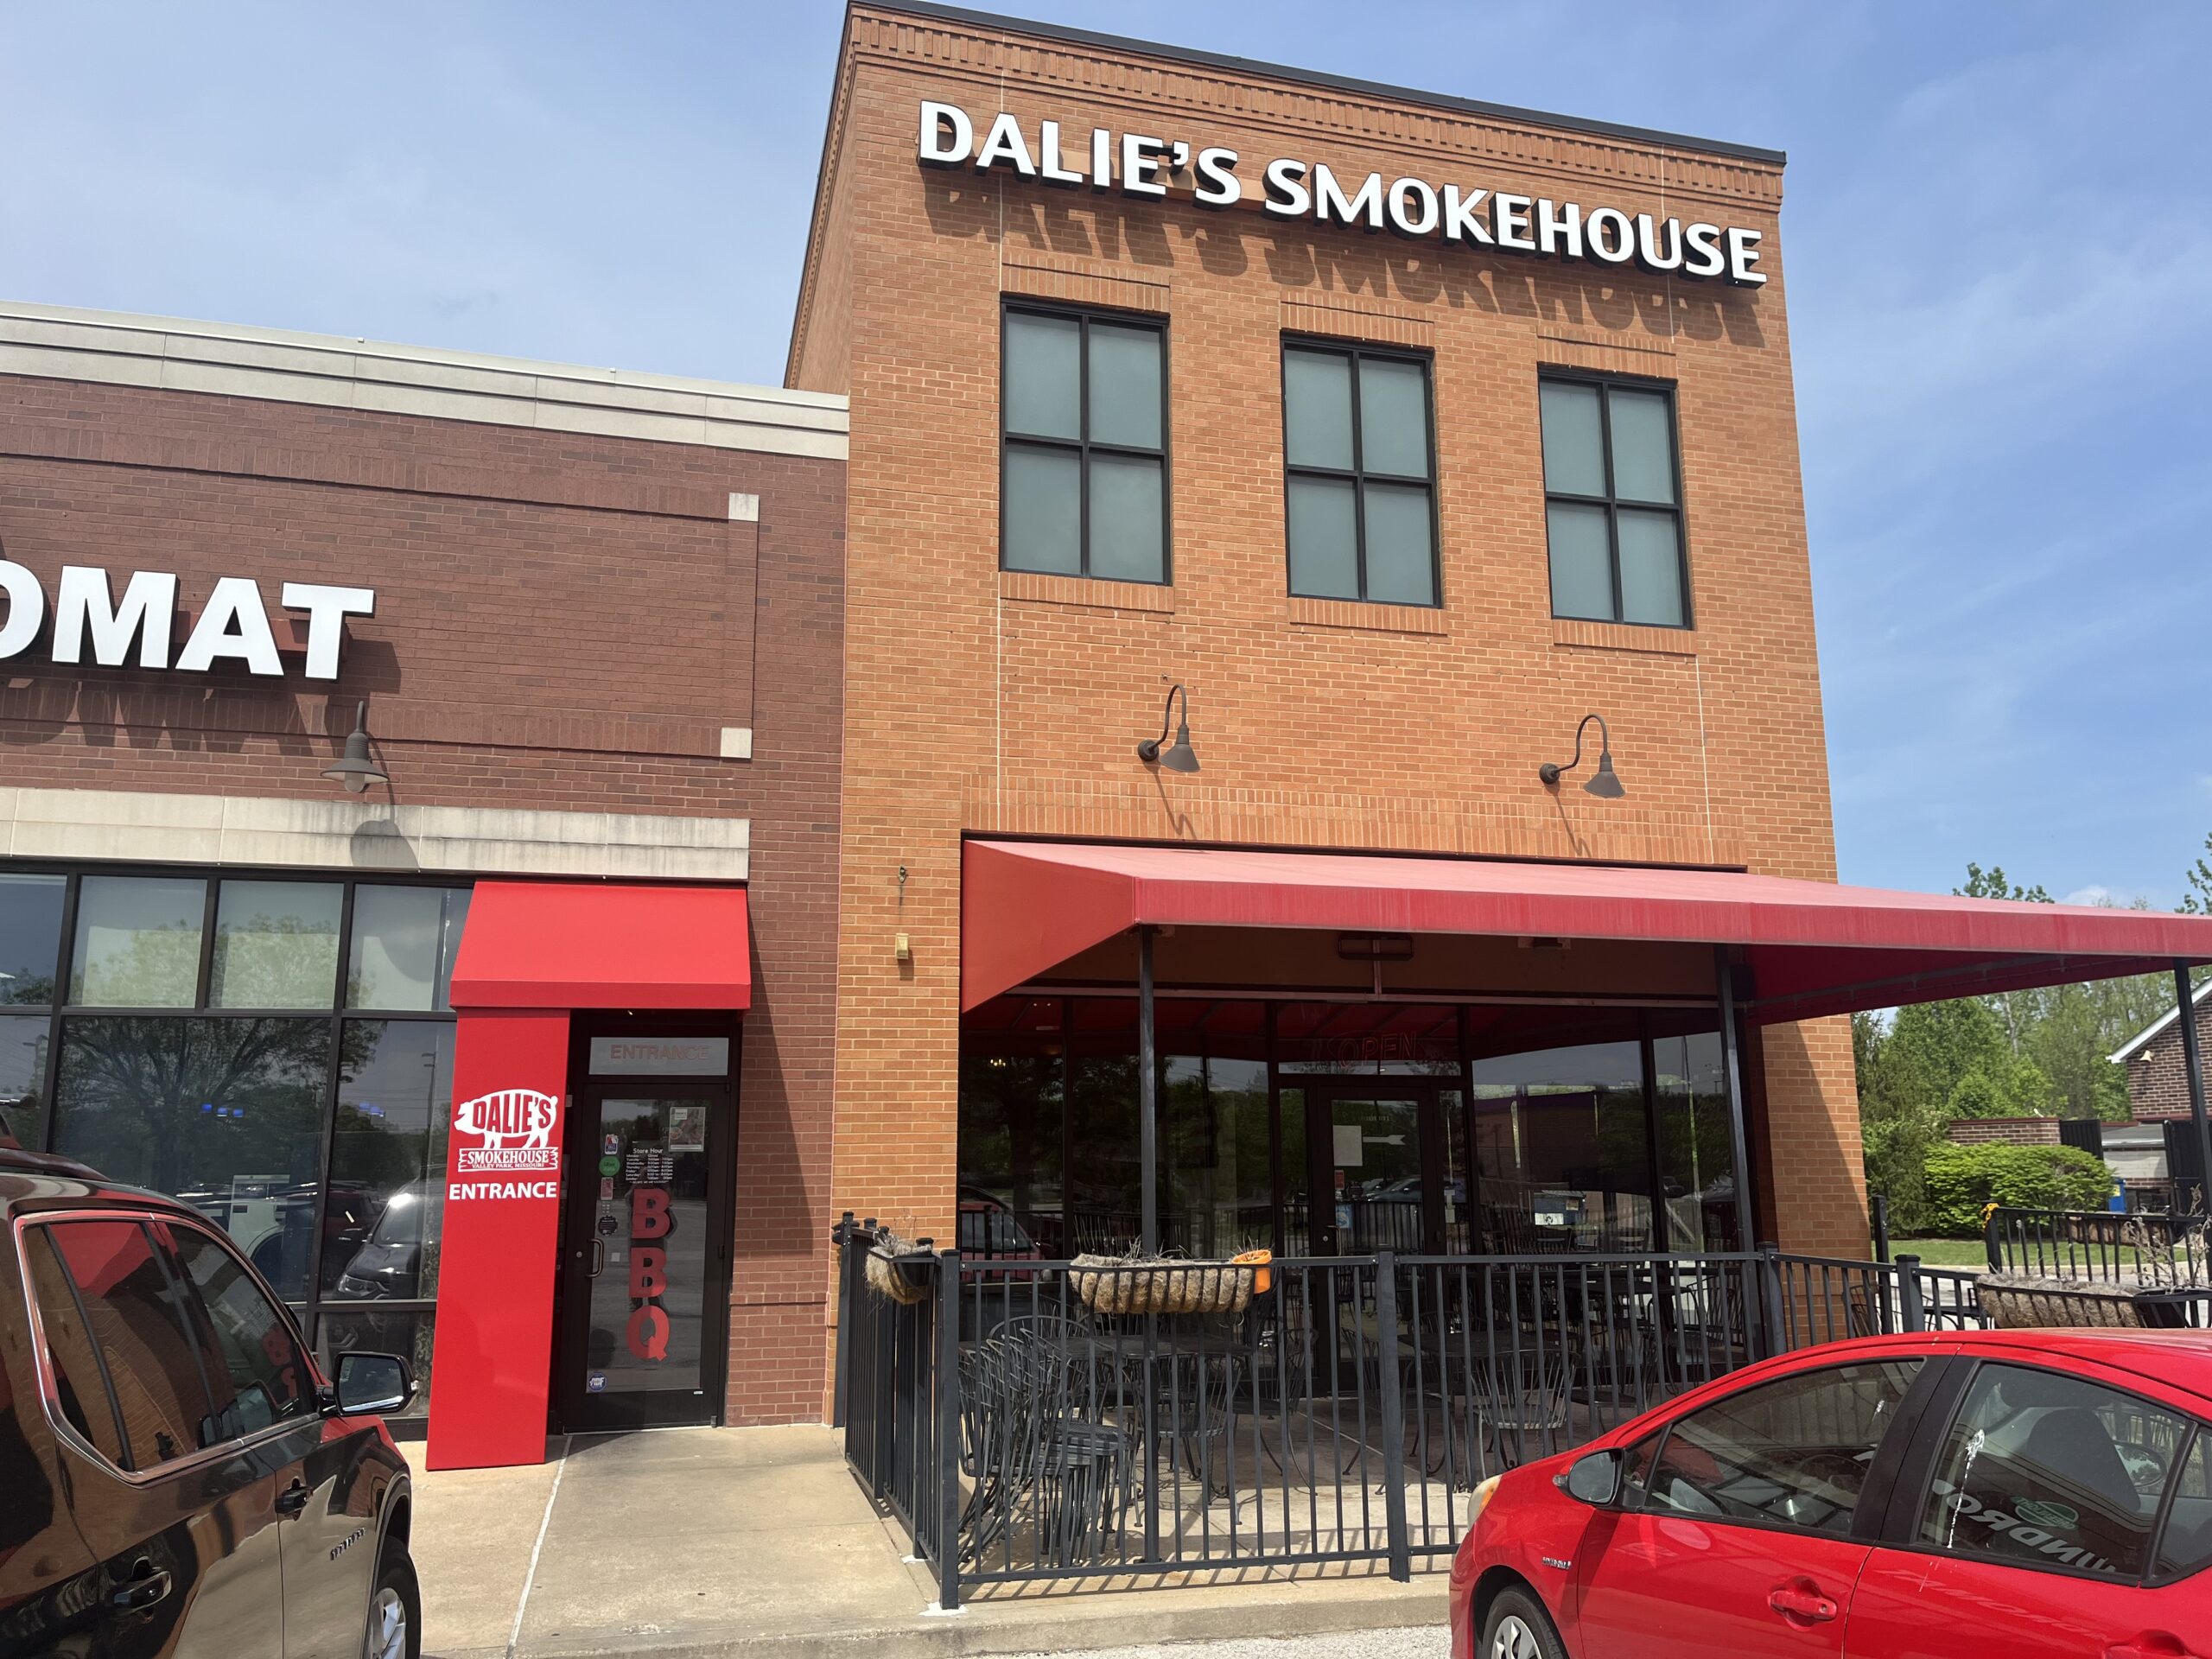 Dalie’s Smokehouse Added to Directory